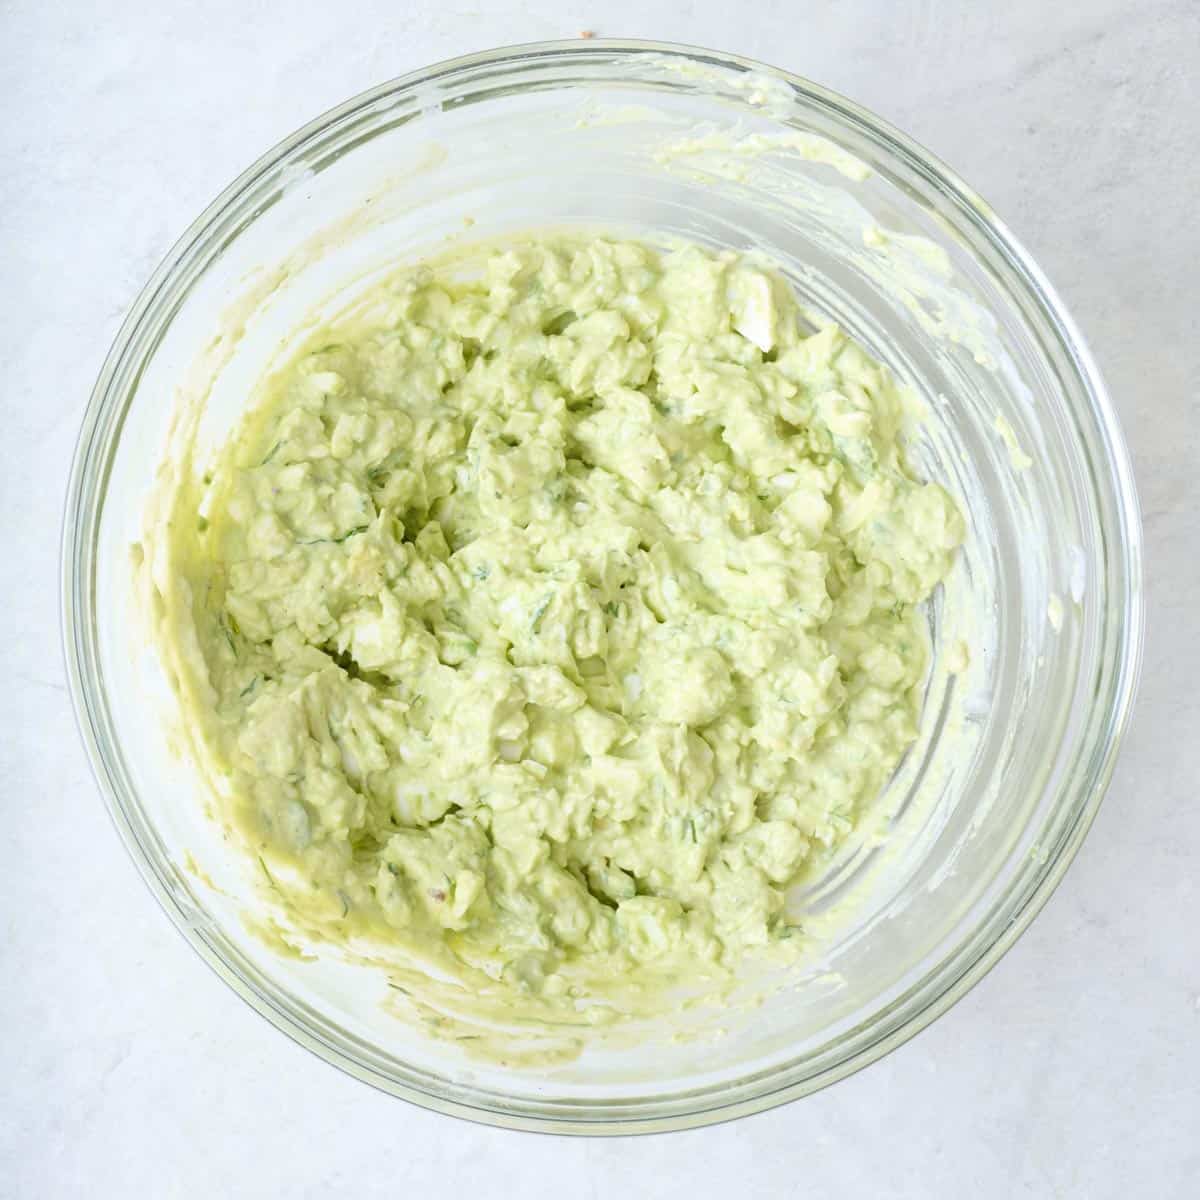 Salad mixture after mashing with eggs and avocado.